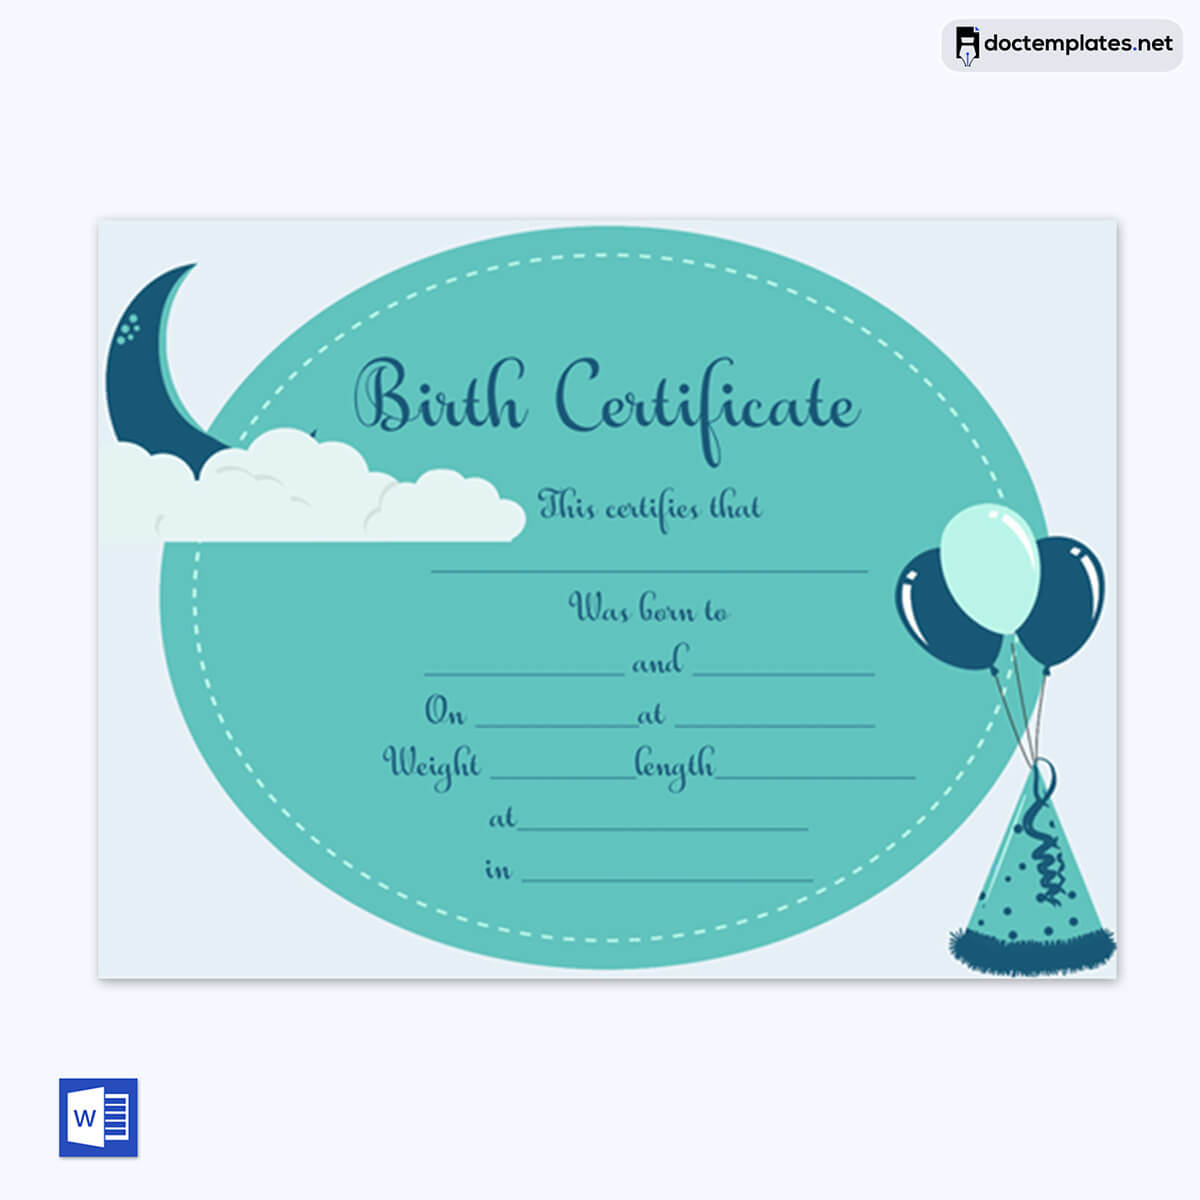 Image of Fillable birth certificate template
Fillable birth certificate template
03